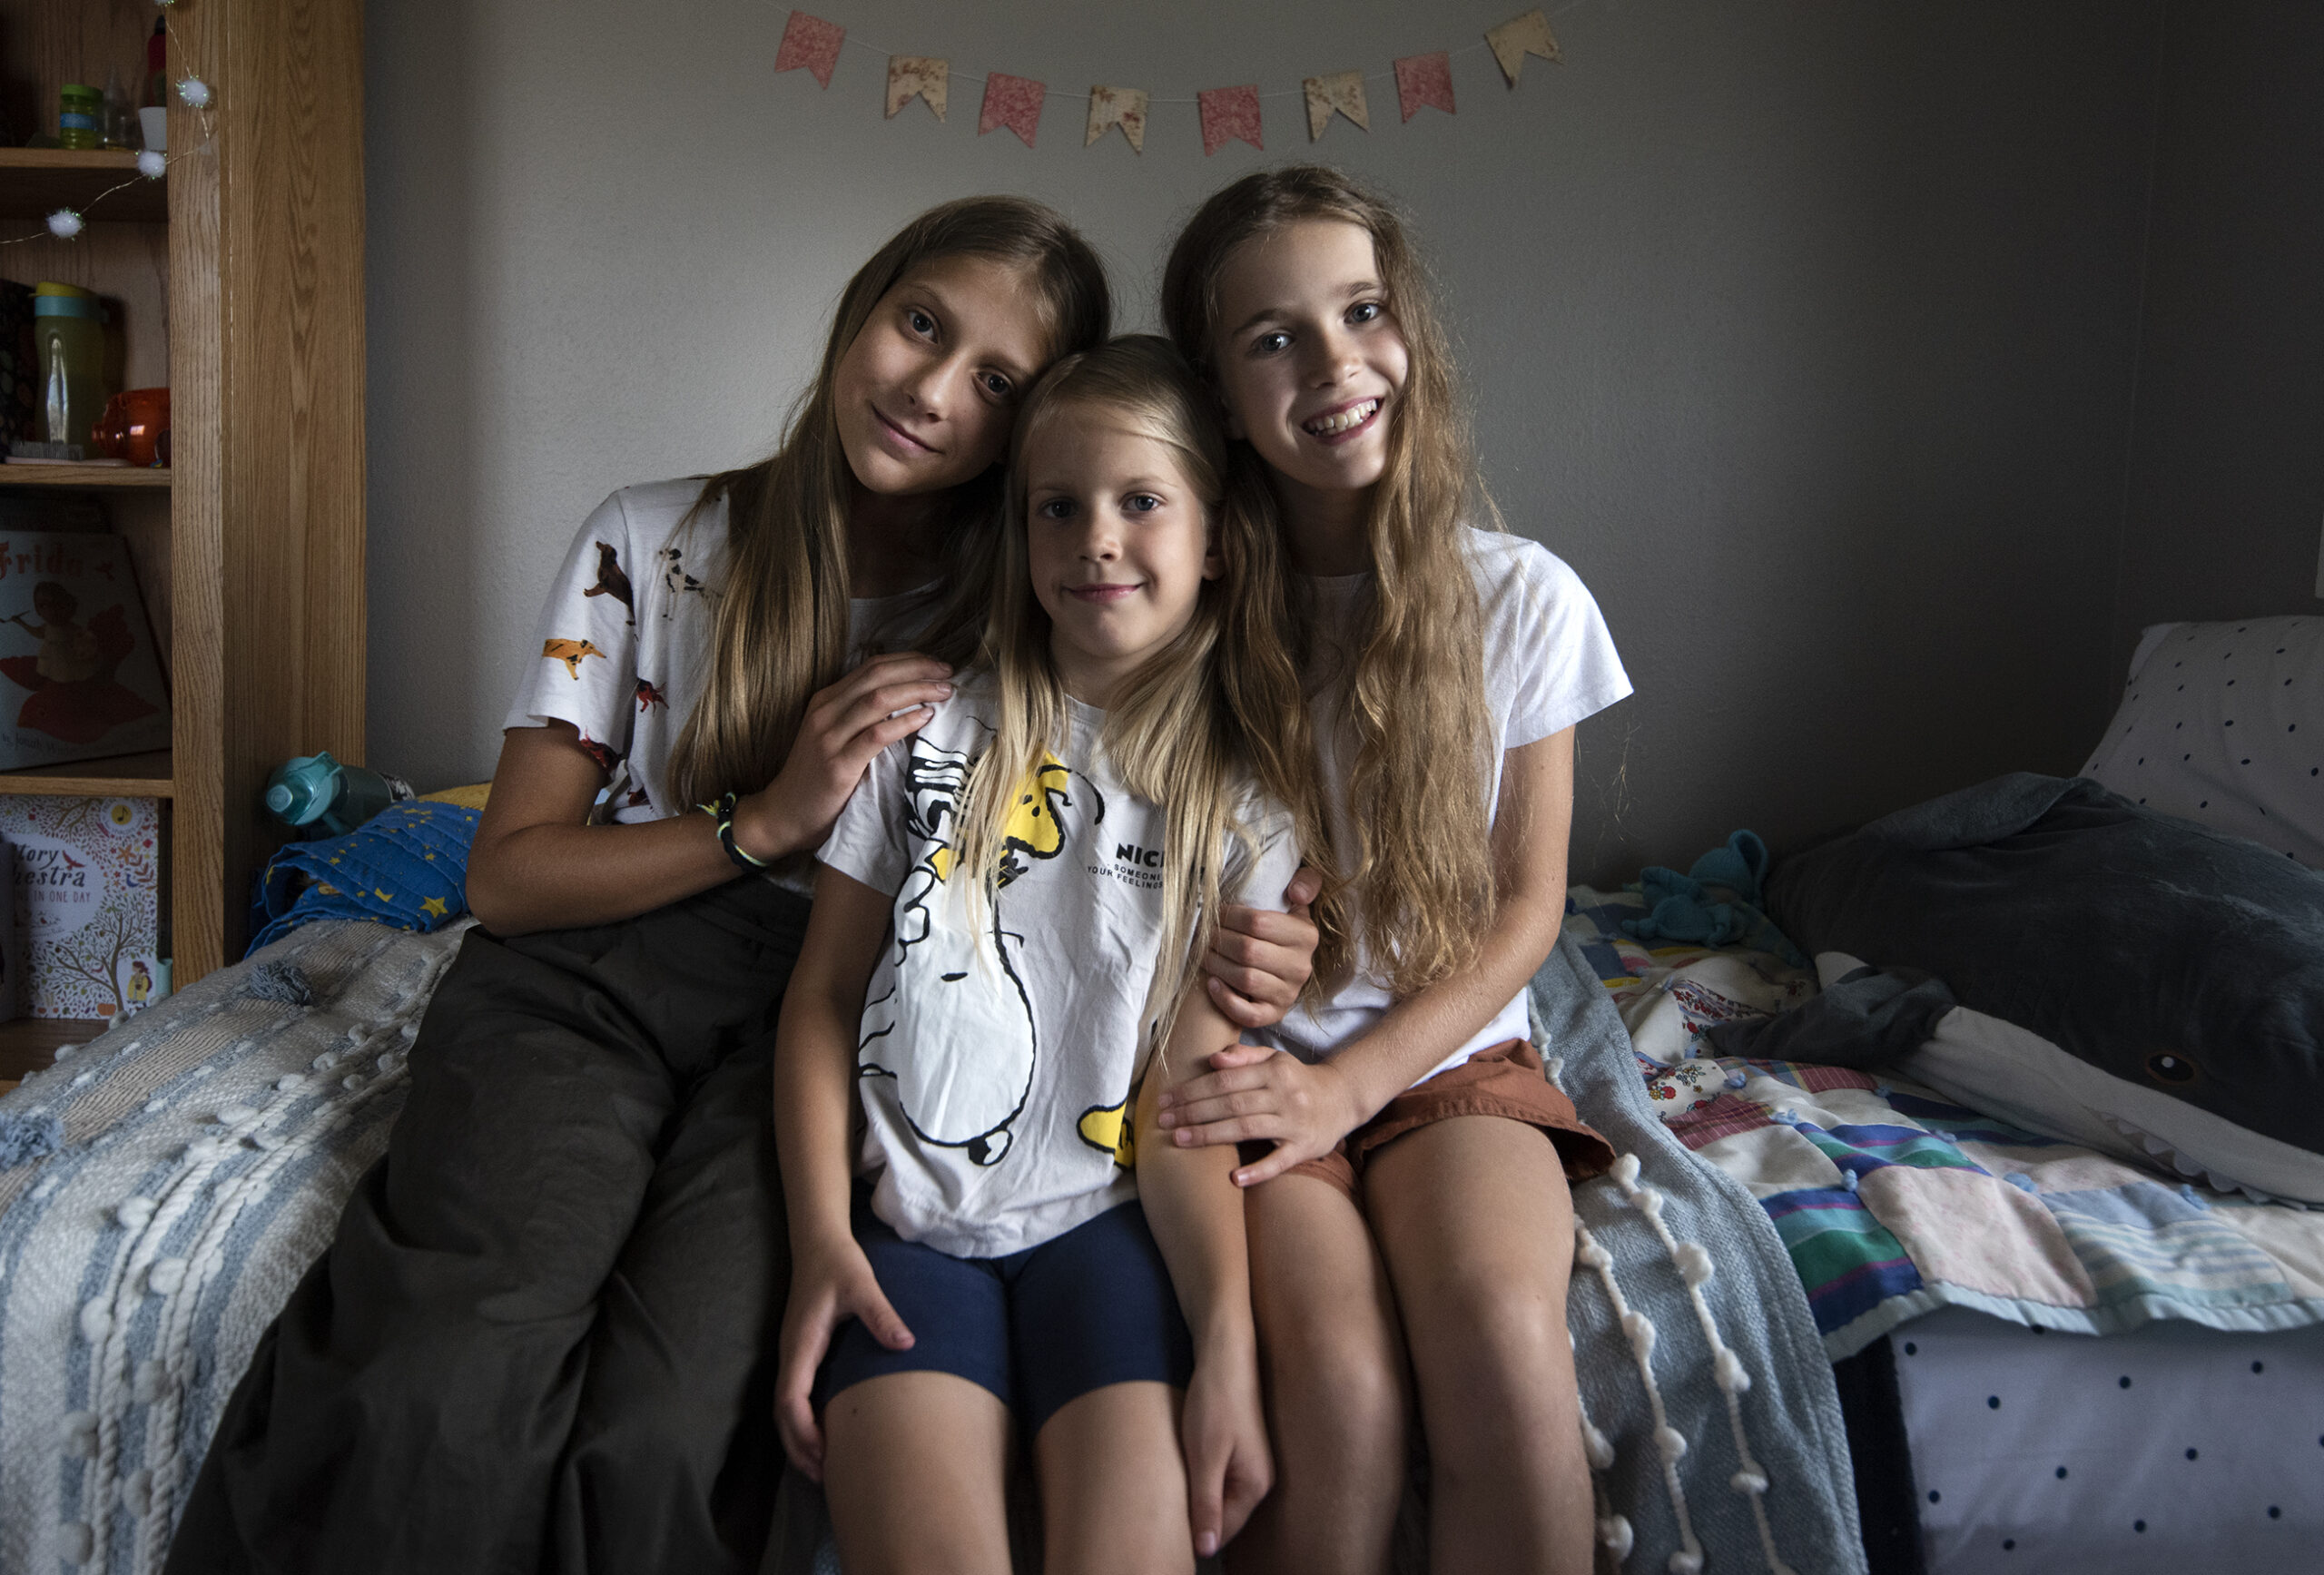 Three girls sit together on a bed.